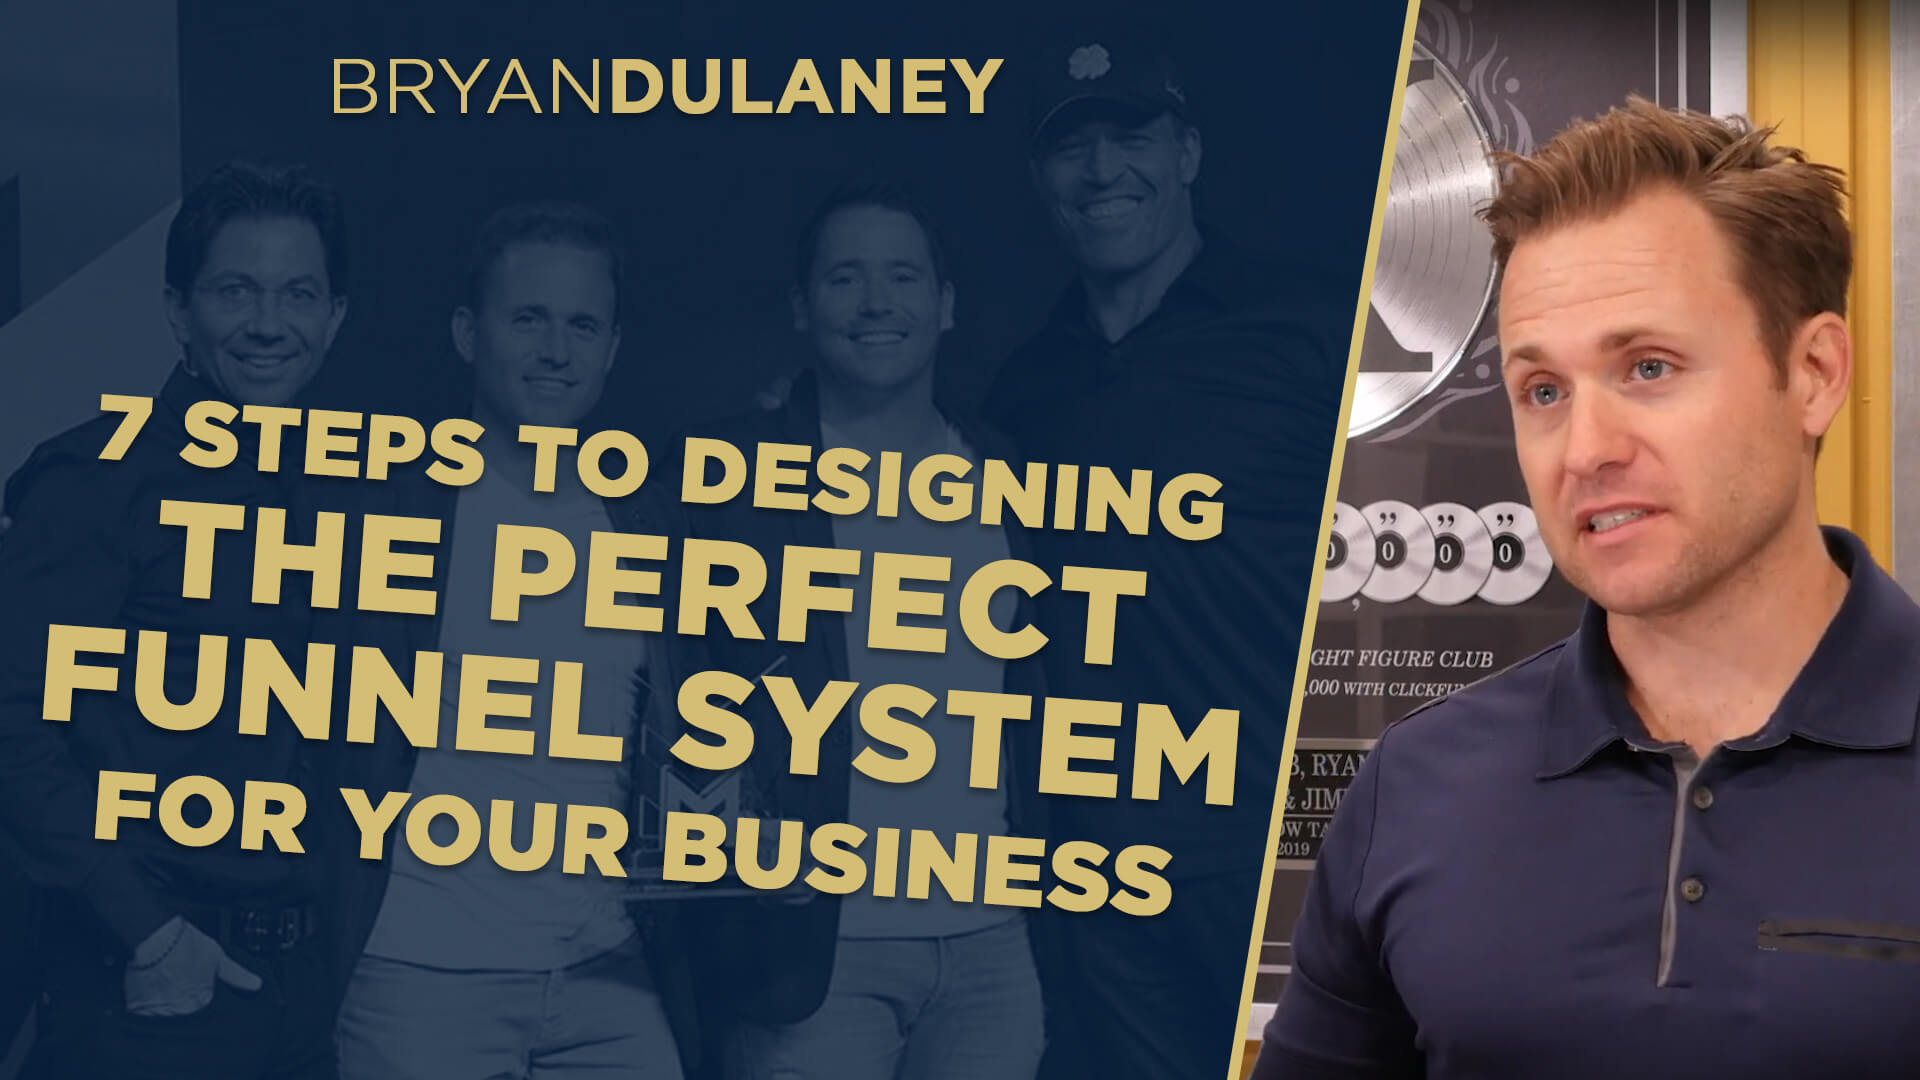 7 Steps To Designing The Perfect Funnel System For Your Business